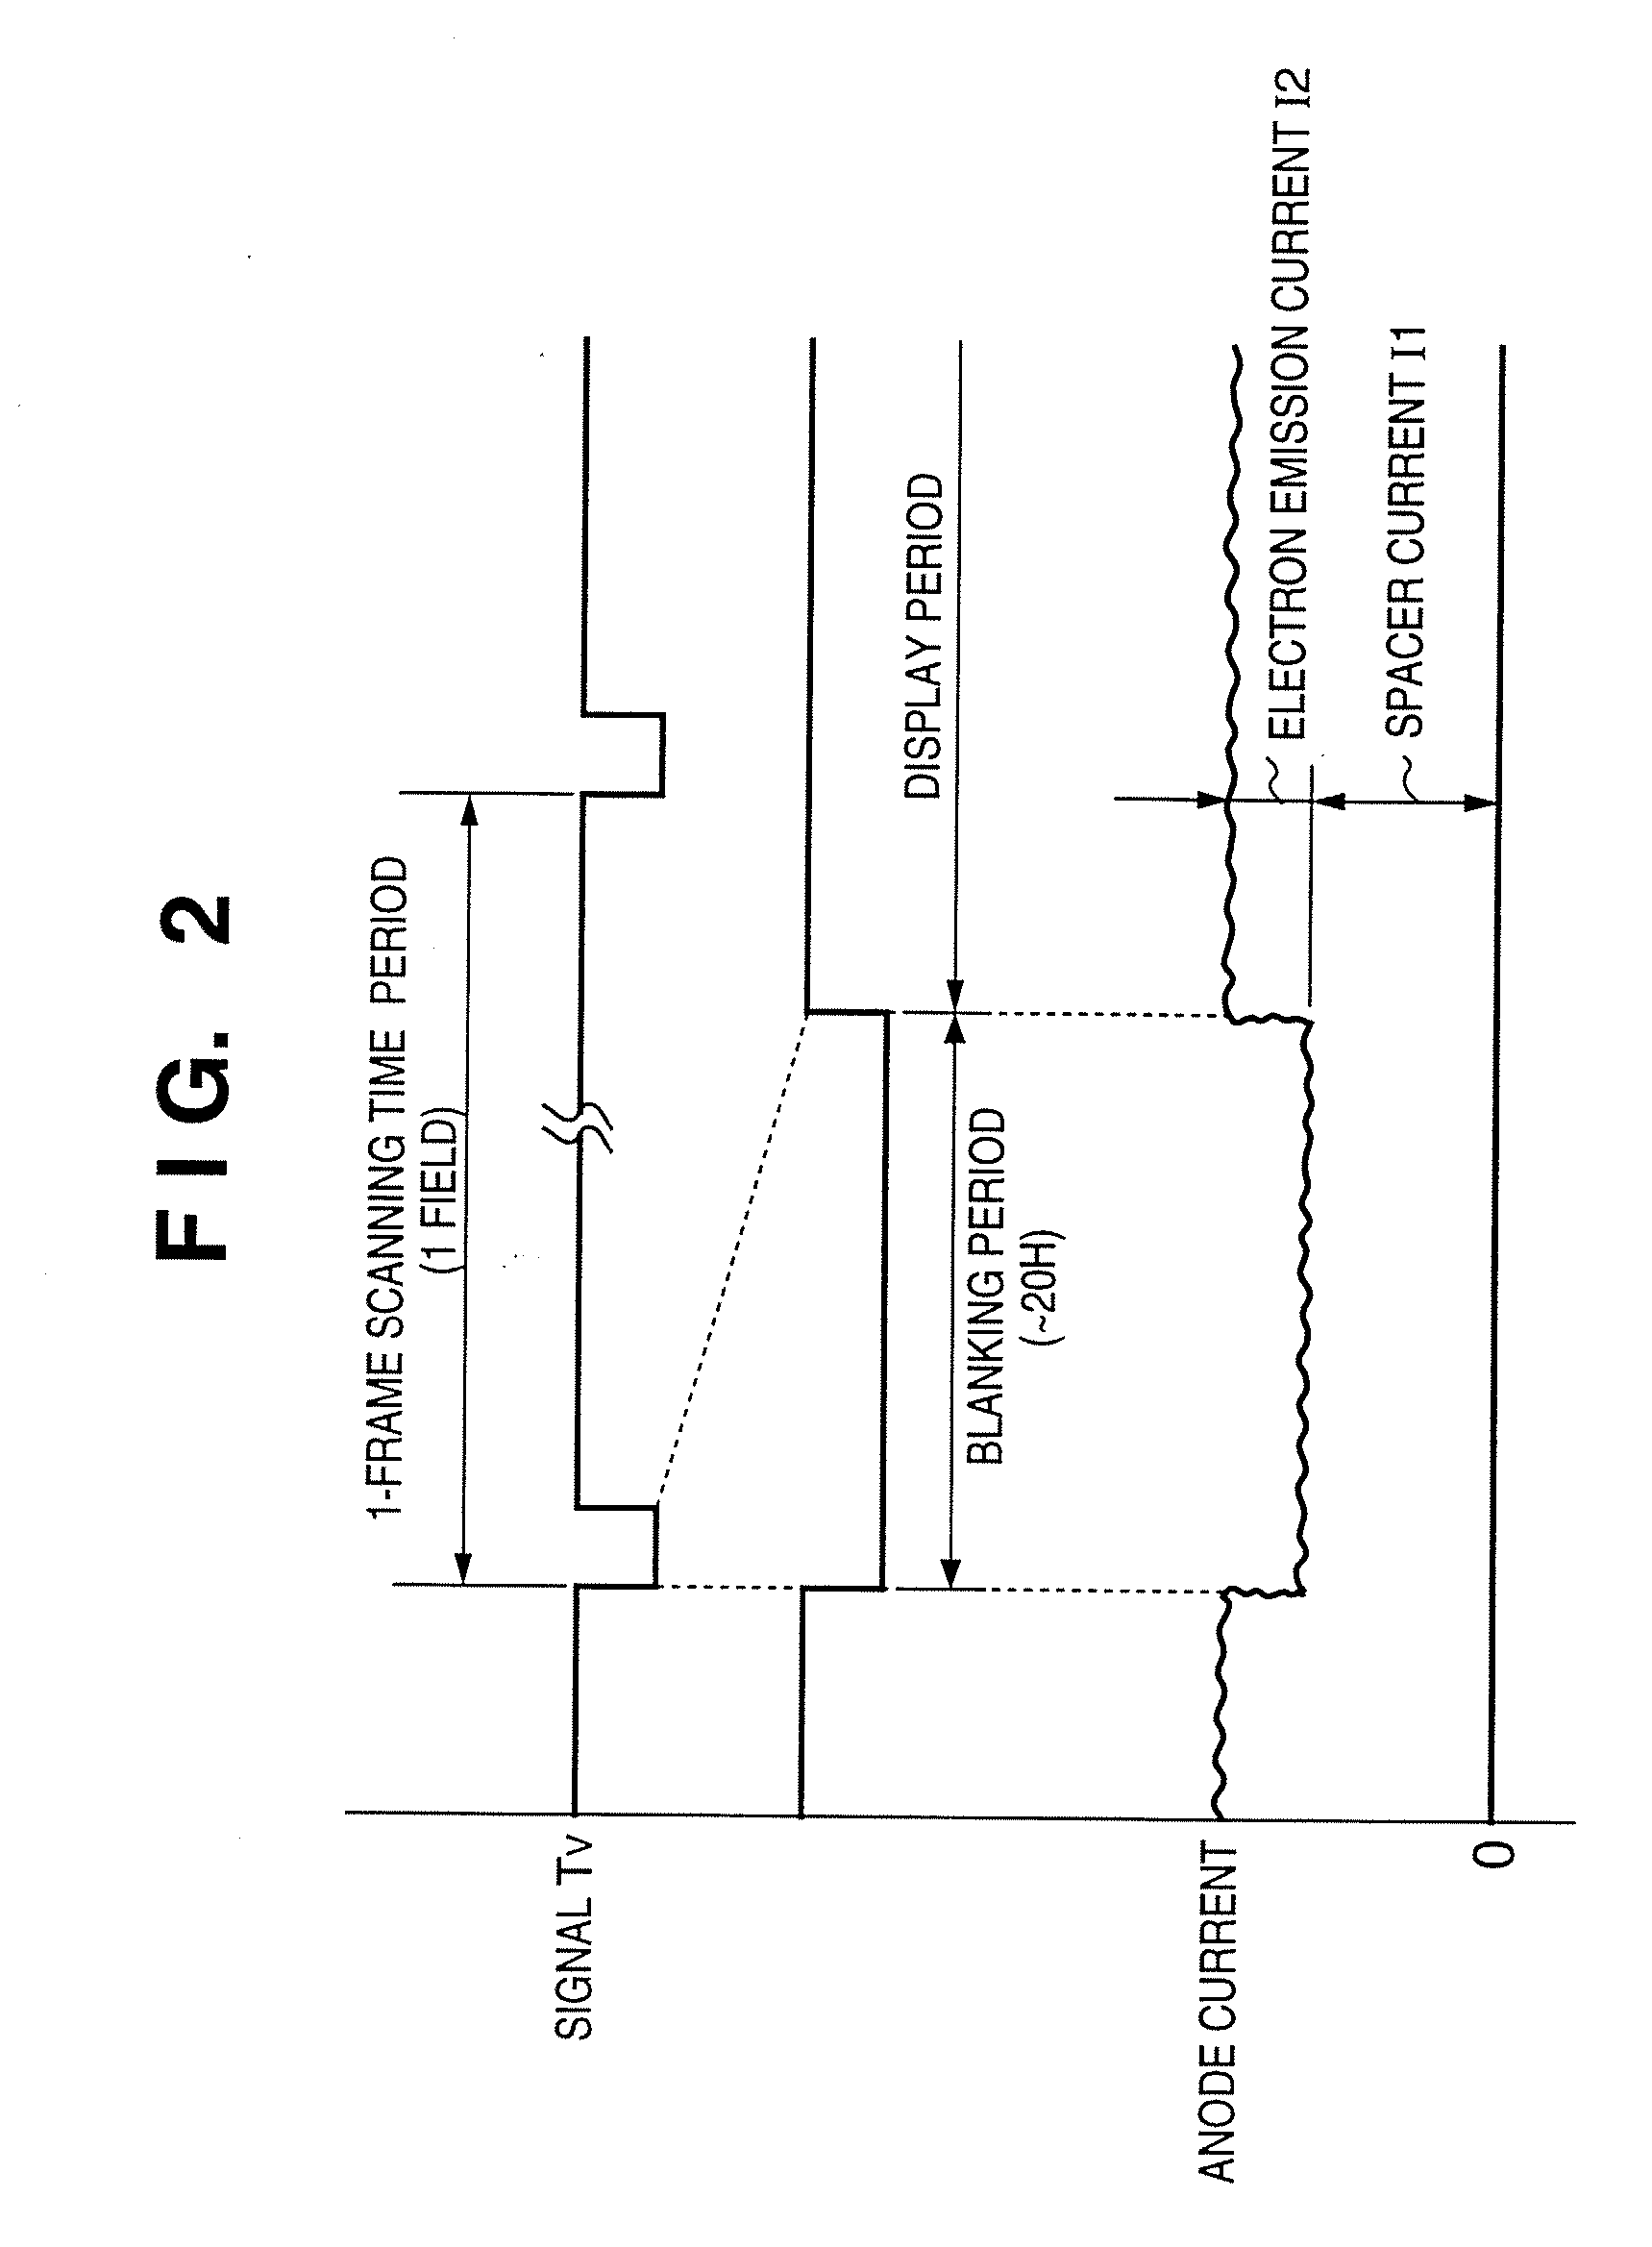 Image display apparatus and control method thereof